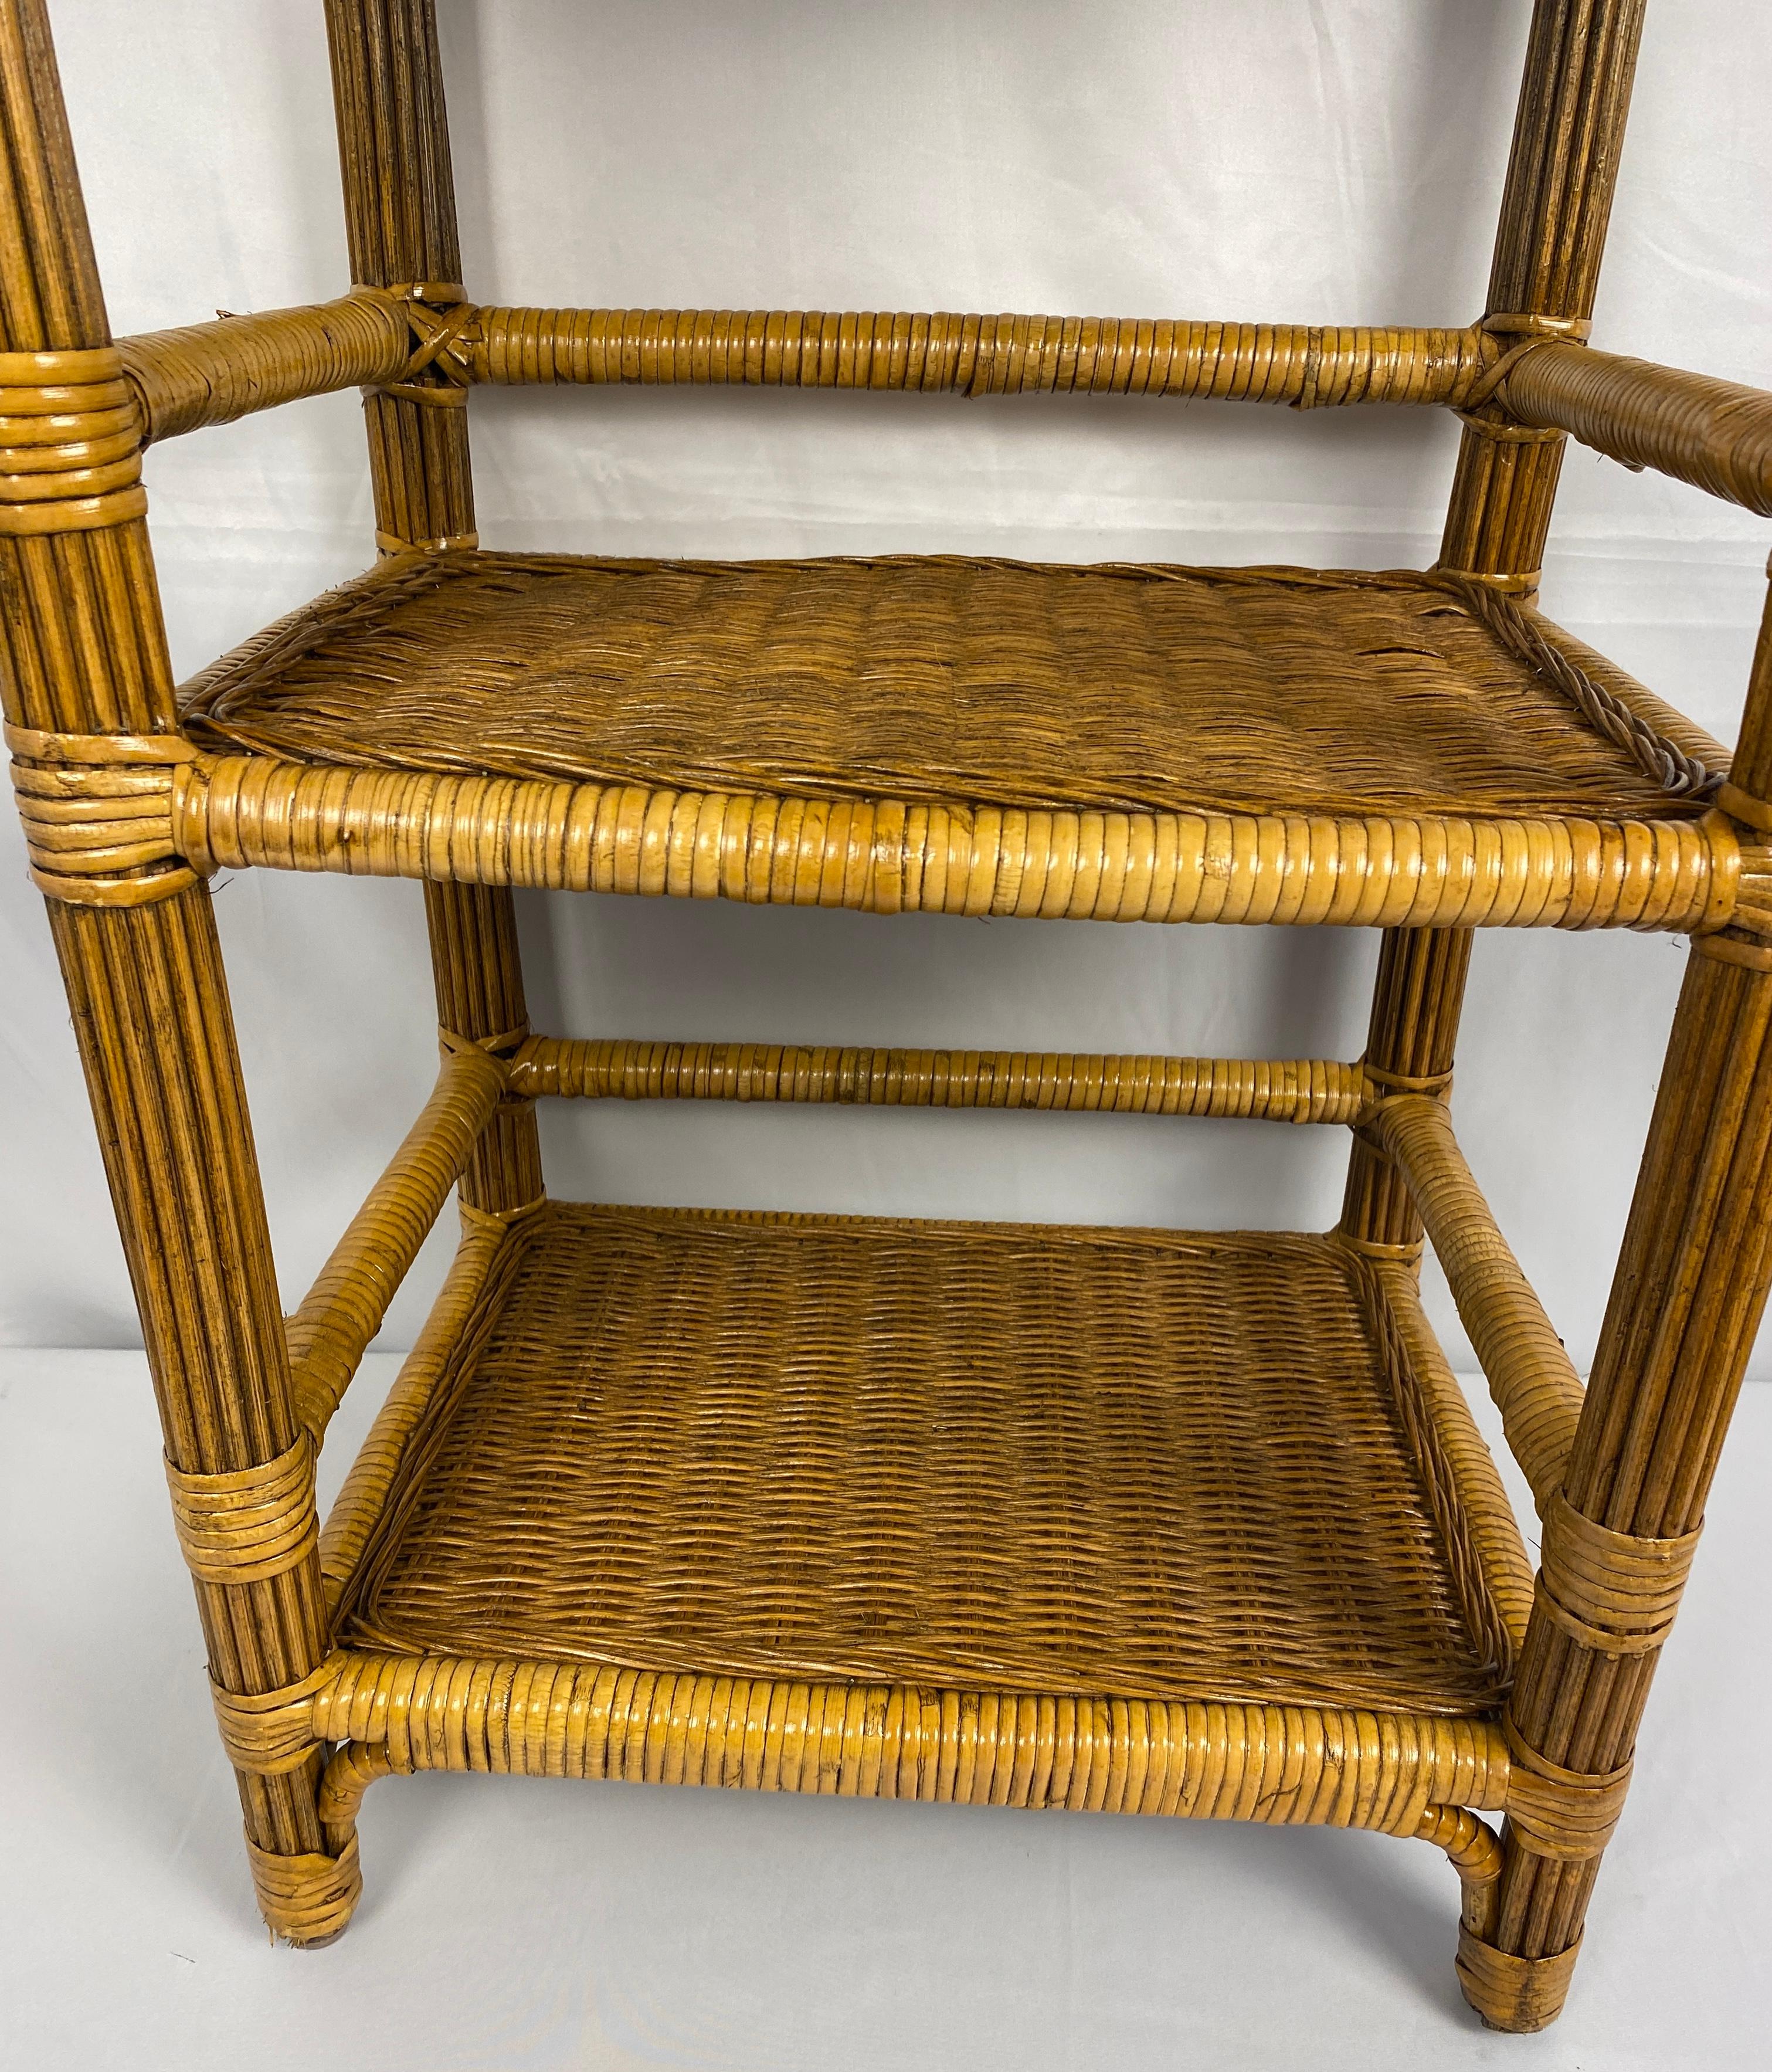 American Vintage Rattan Side Table with 3 Shelves For Sale